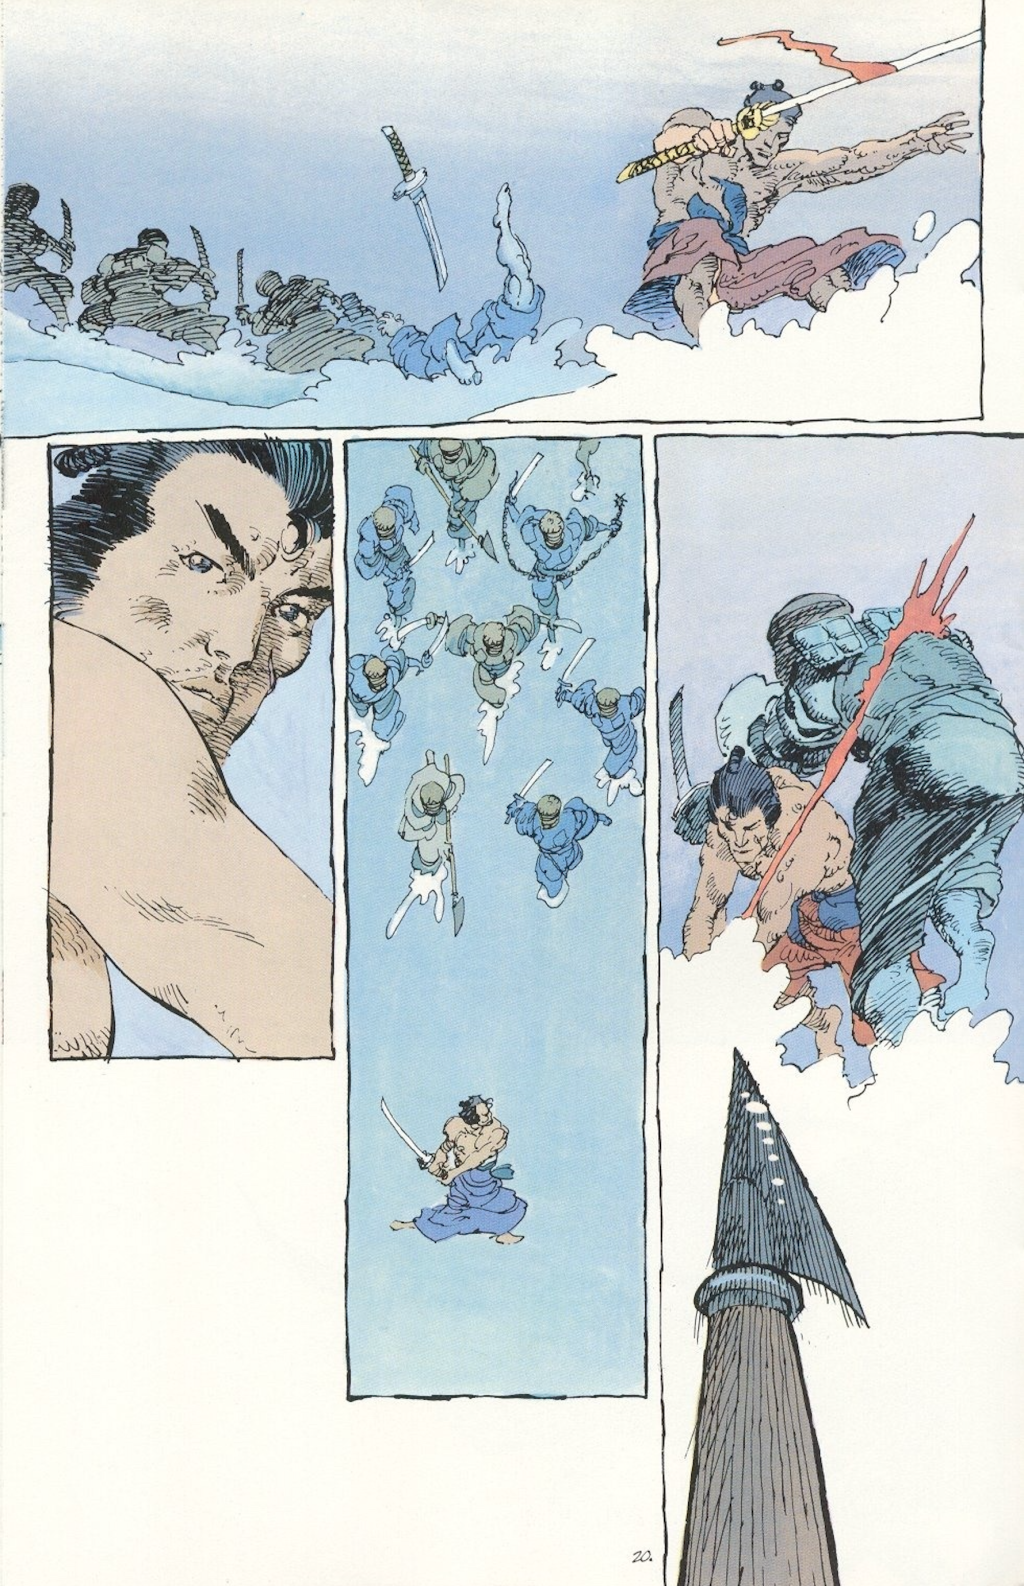 Ronin Vol. 1 Issue #5 (1983), DC Comics. Words by Frank Miller. Art by Frank Miller and Lynn Varley